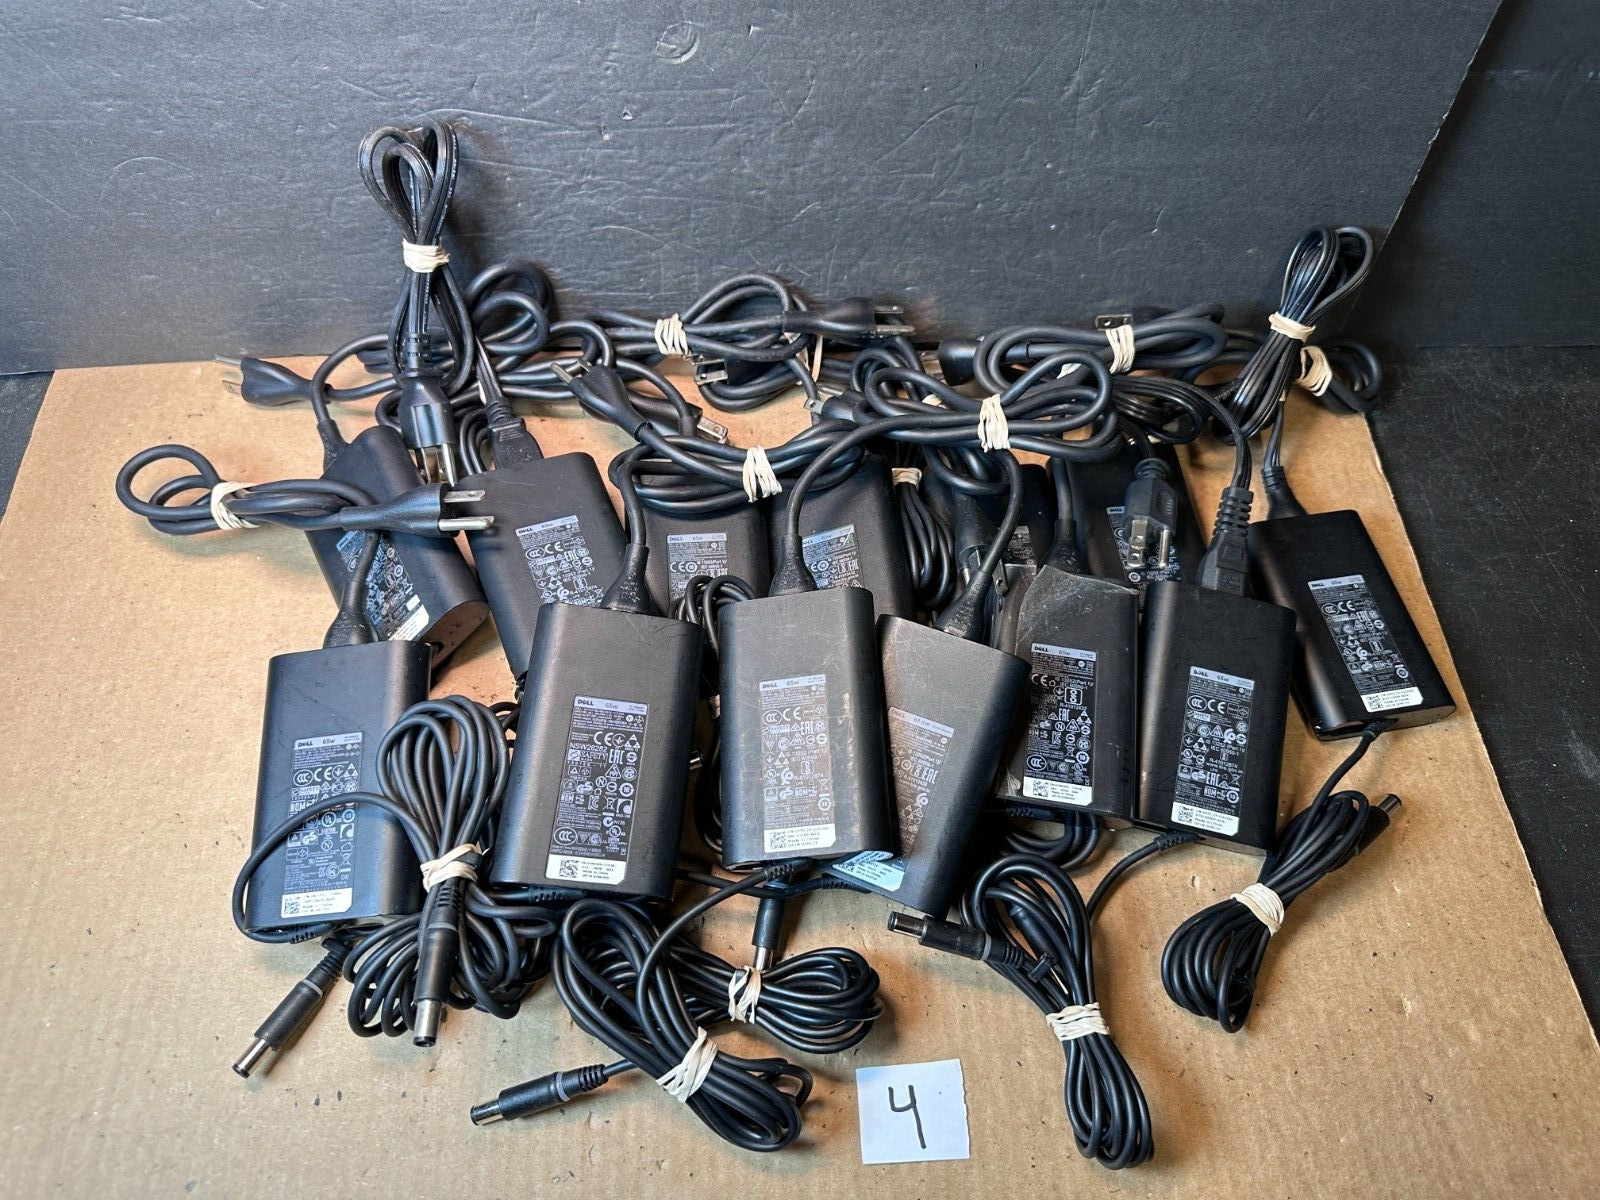 Lot of 13 Genuine Dell 65W 19.5V 3.34A Adapter Chargers LA65NM130 HA65NM130